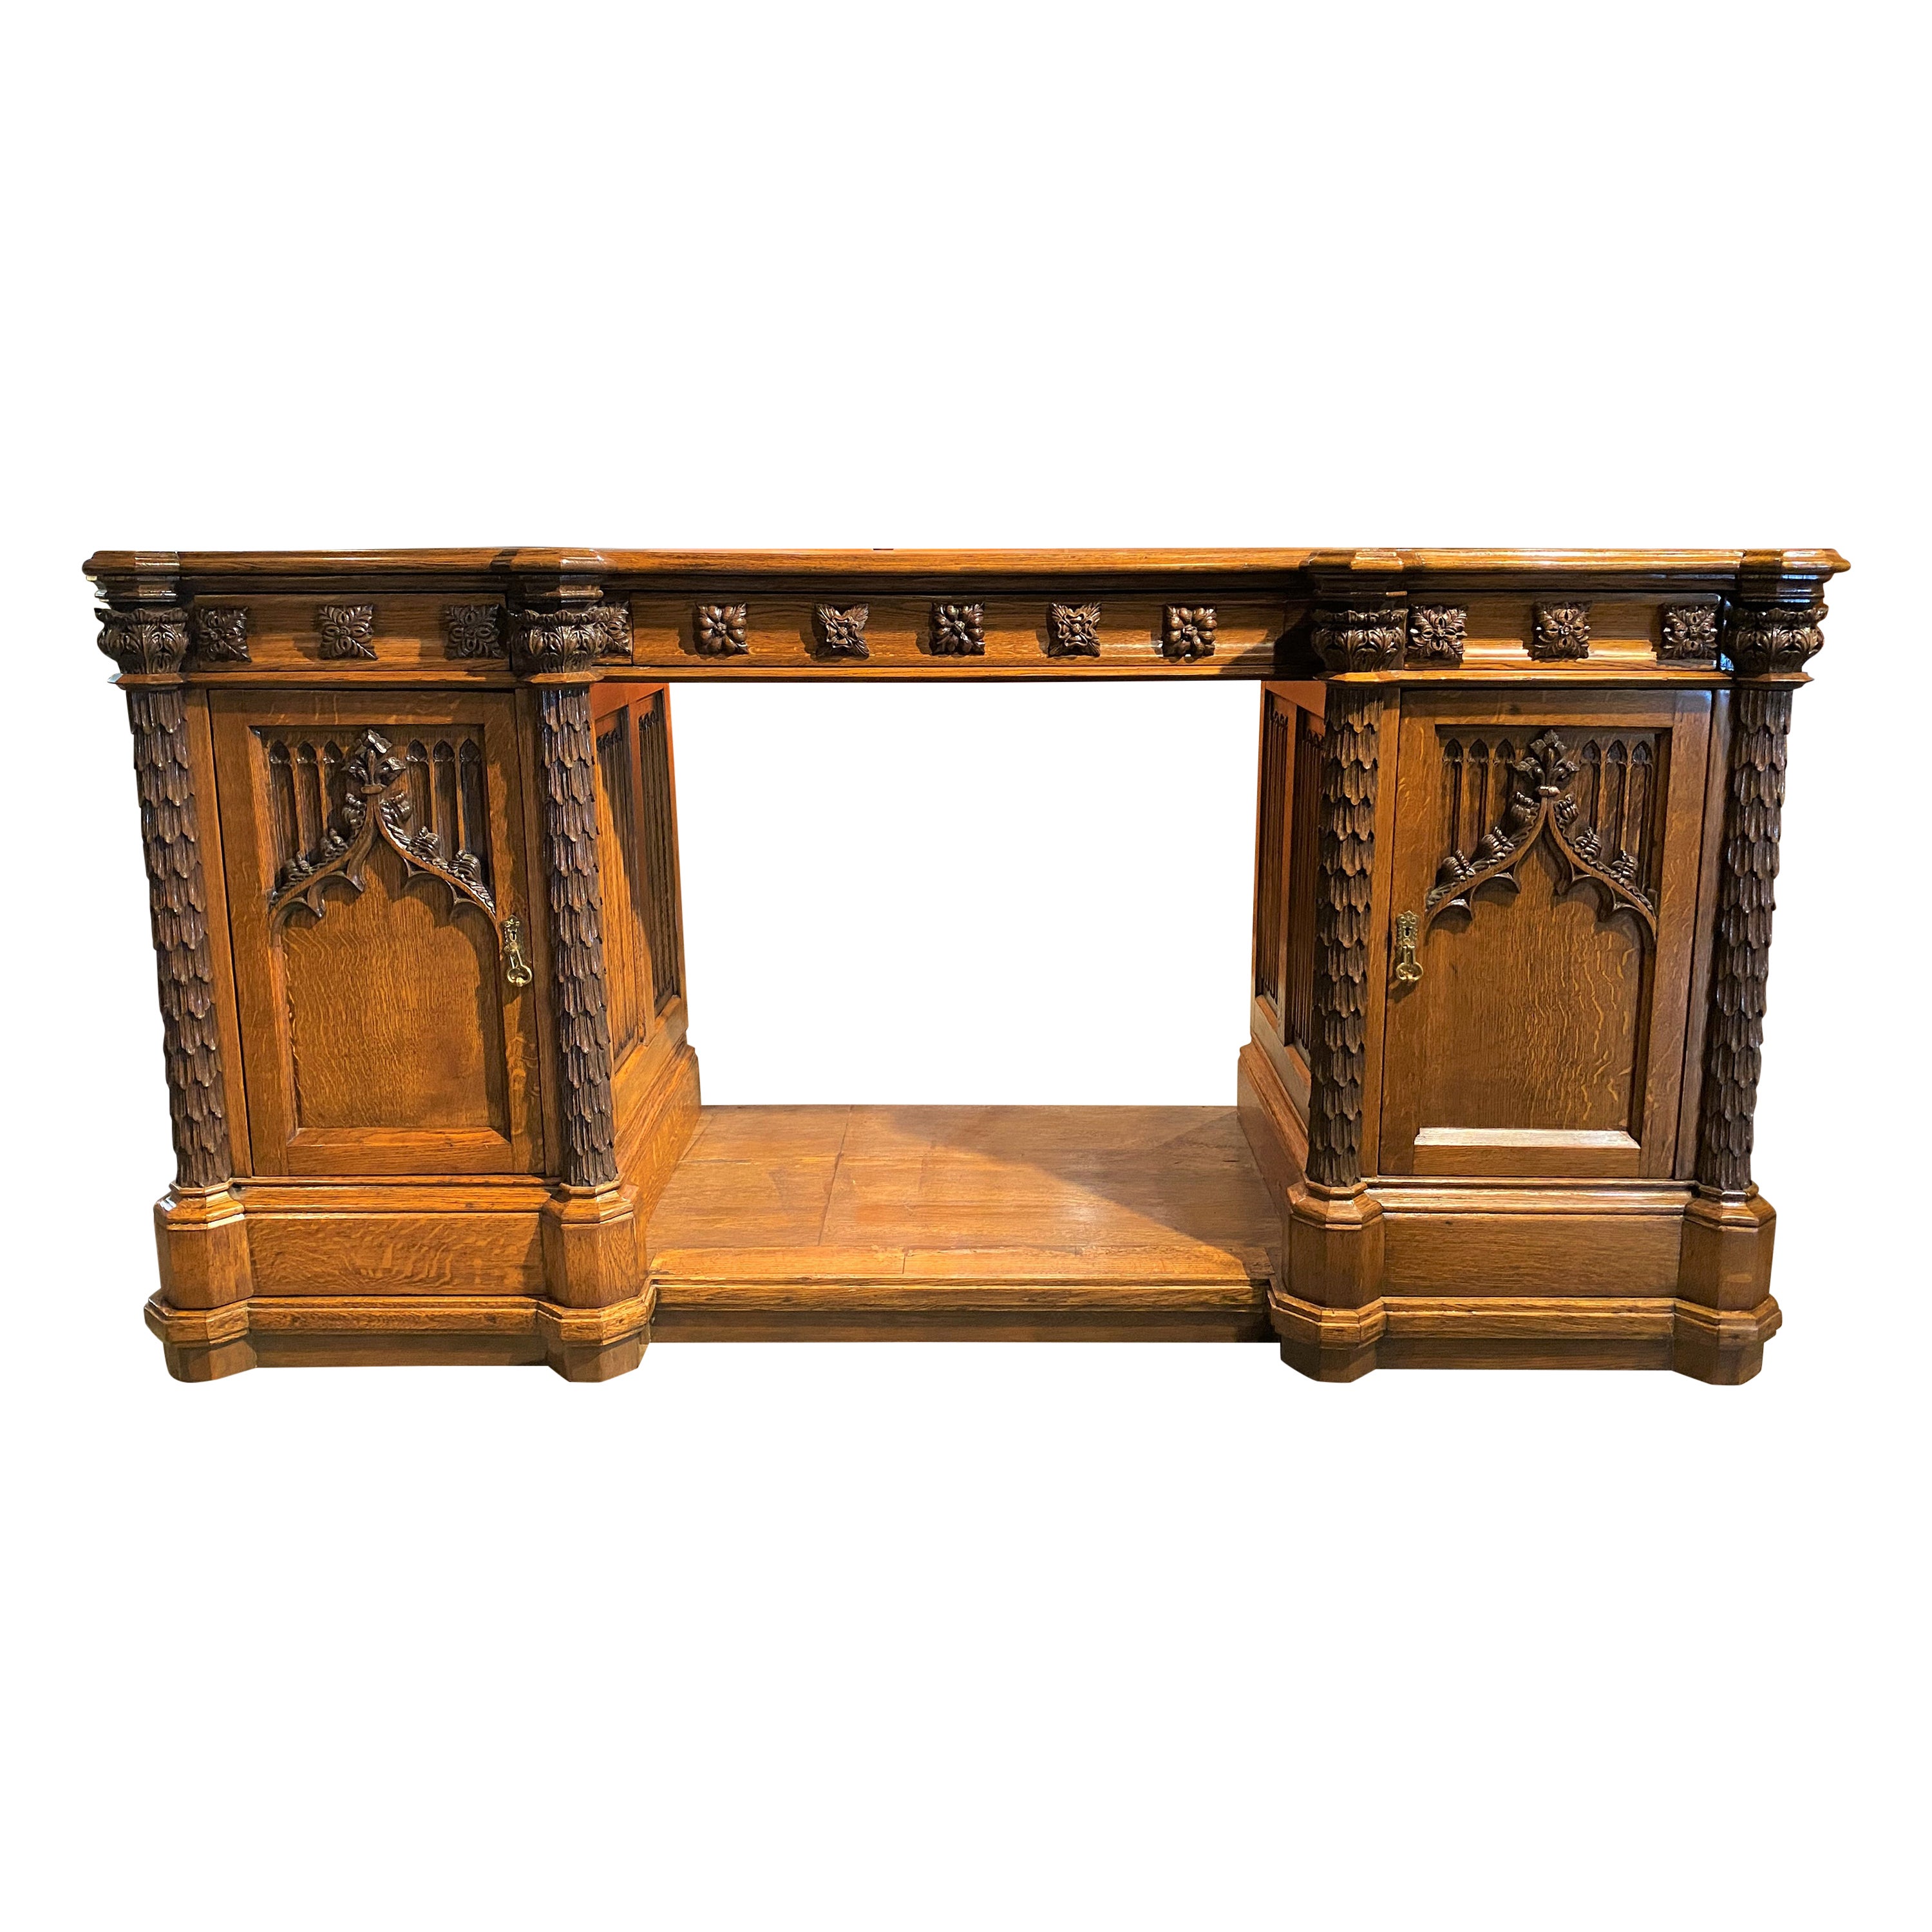 Gothic Revival Quarter Sawn Oak Sideboard with Exceptional Carving